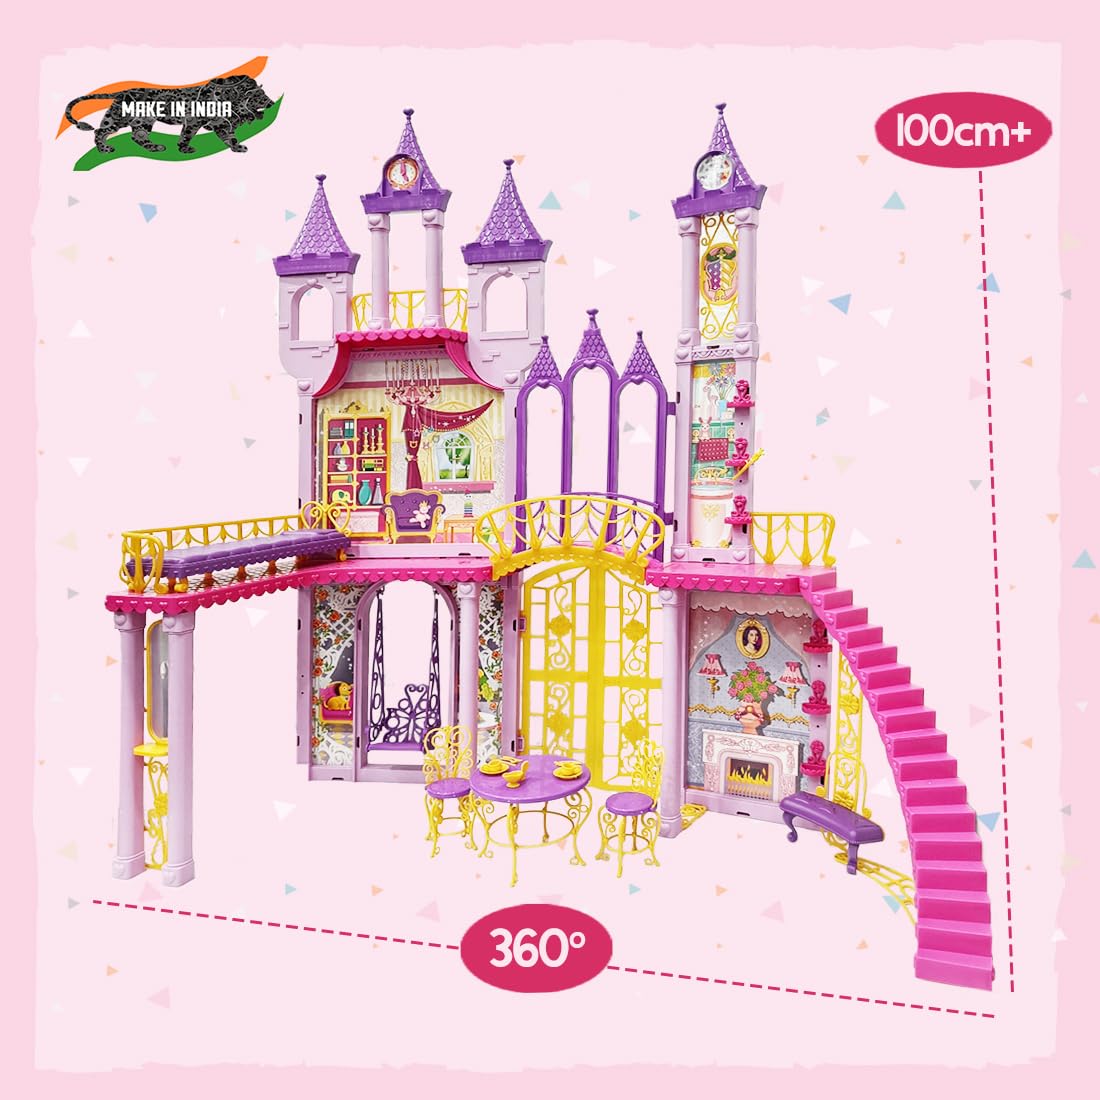 Simba Steffie Love Doll House for Girls (30+ Pieces) Play Set for Girls | Dream Castle Doll House | Big Doll House for Girls Age 5+ Years | Ideal for Birthday Gift